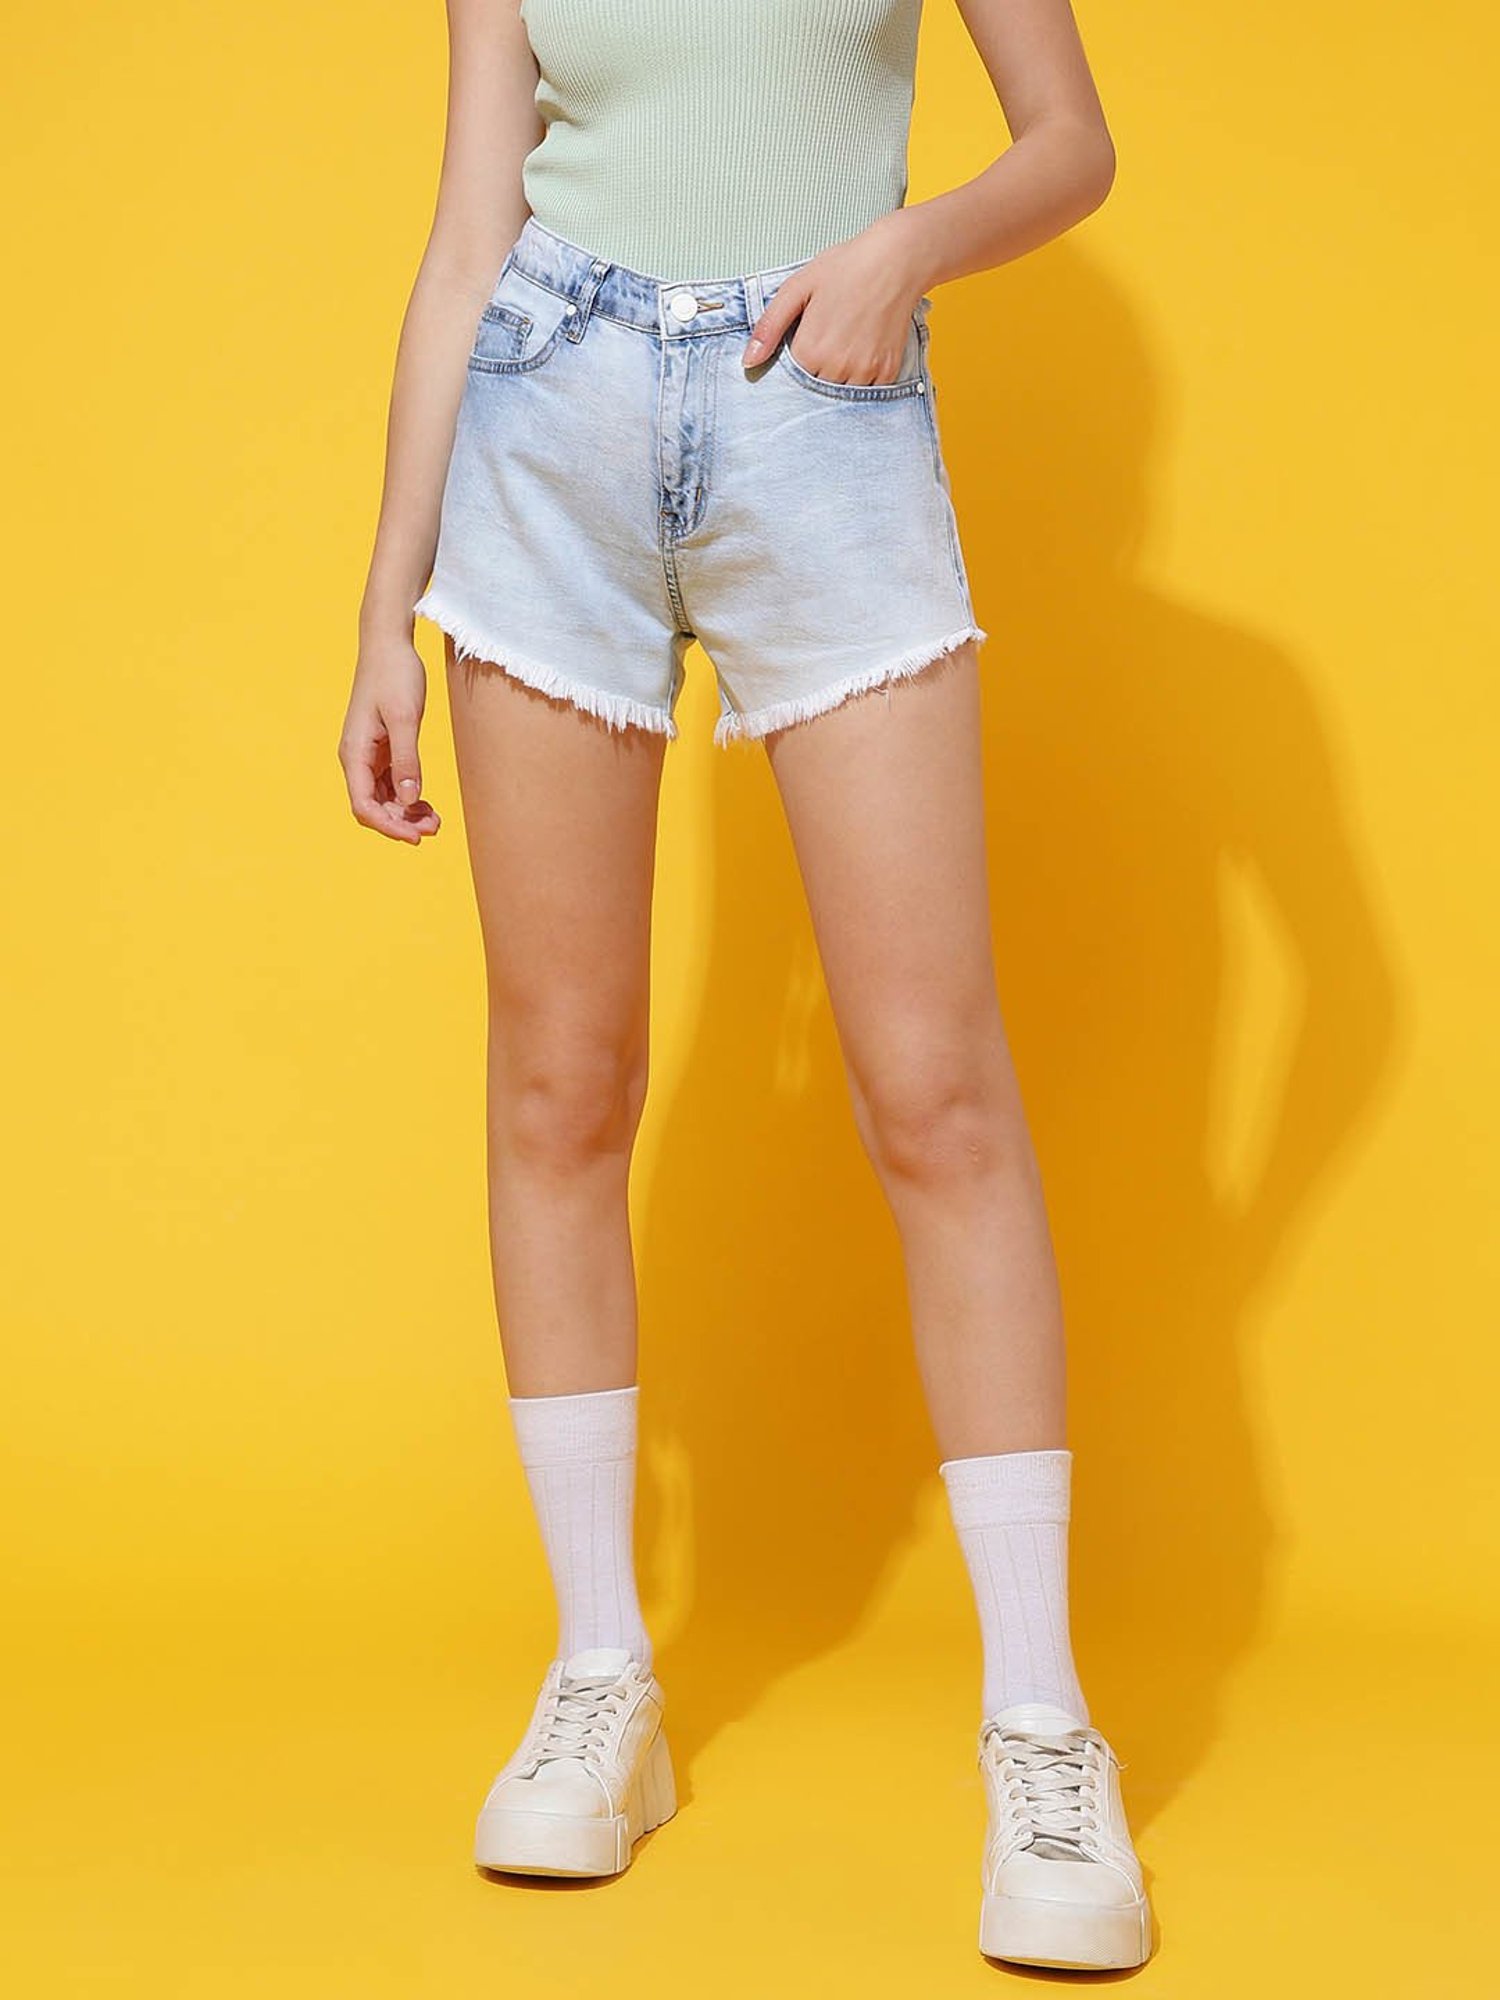 The Best Denim Shorts by Inseam - Living in Yellow